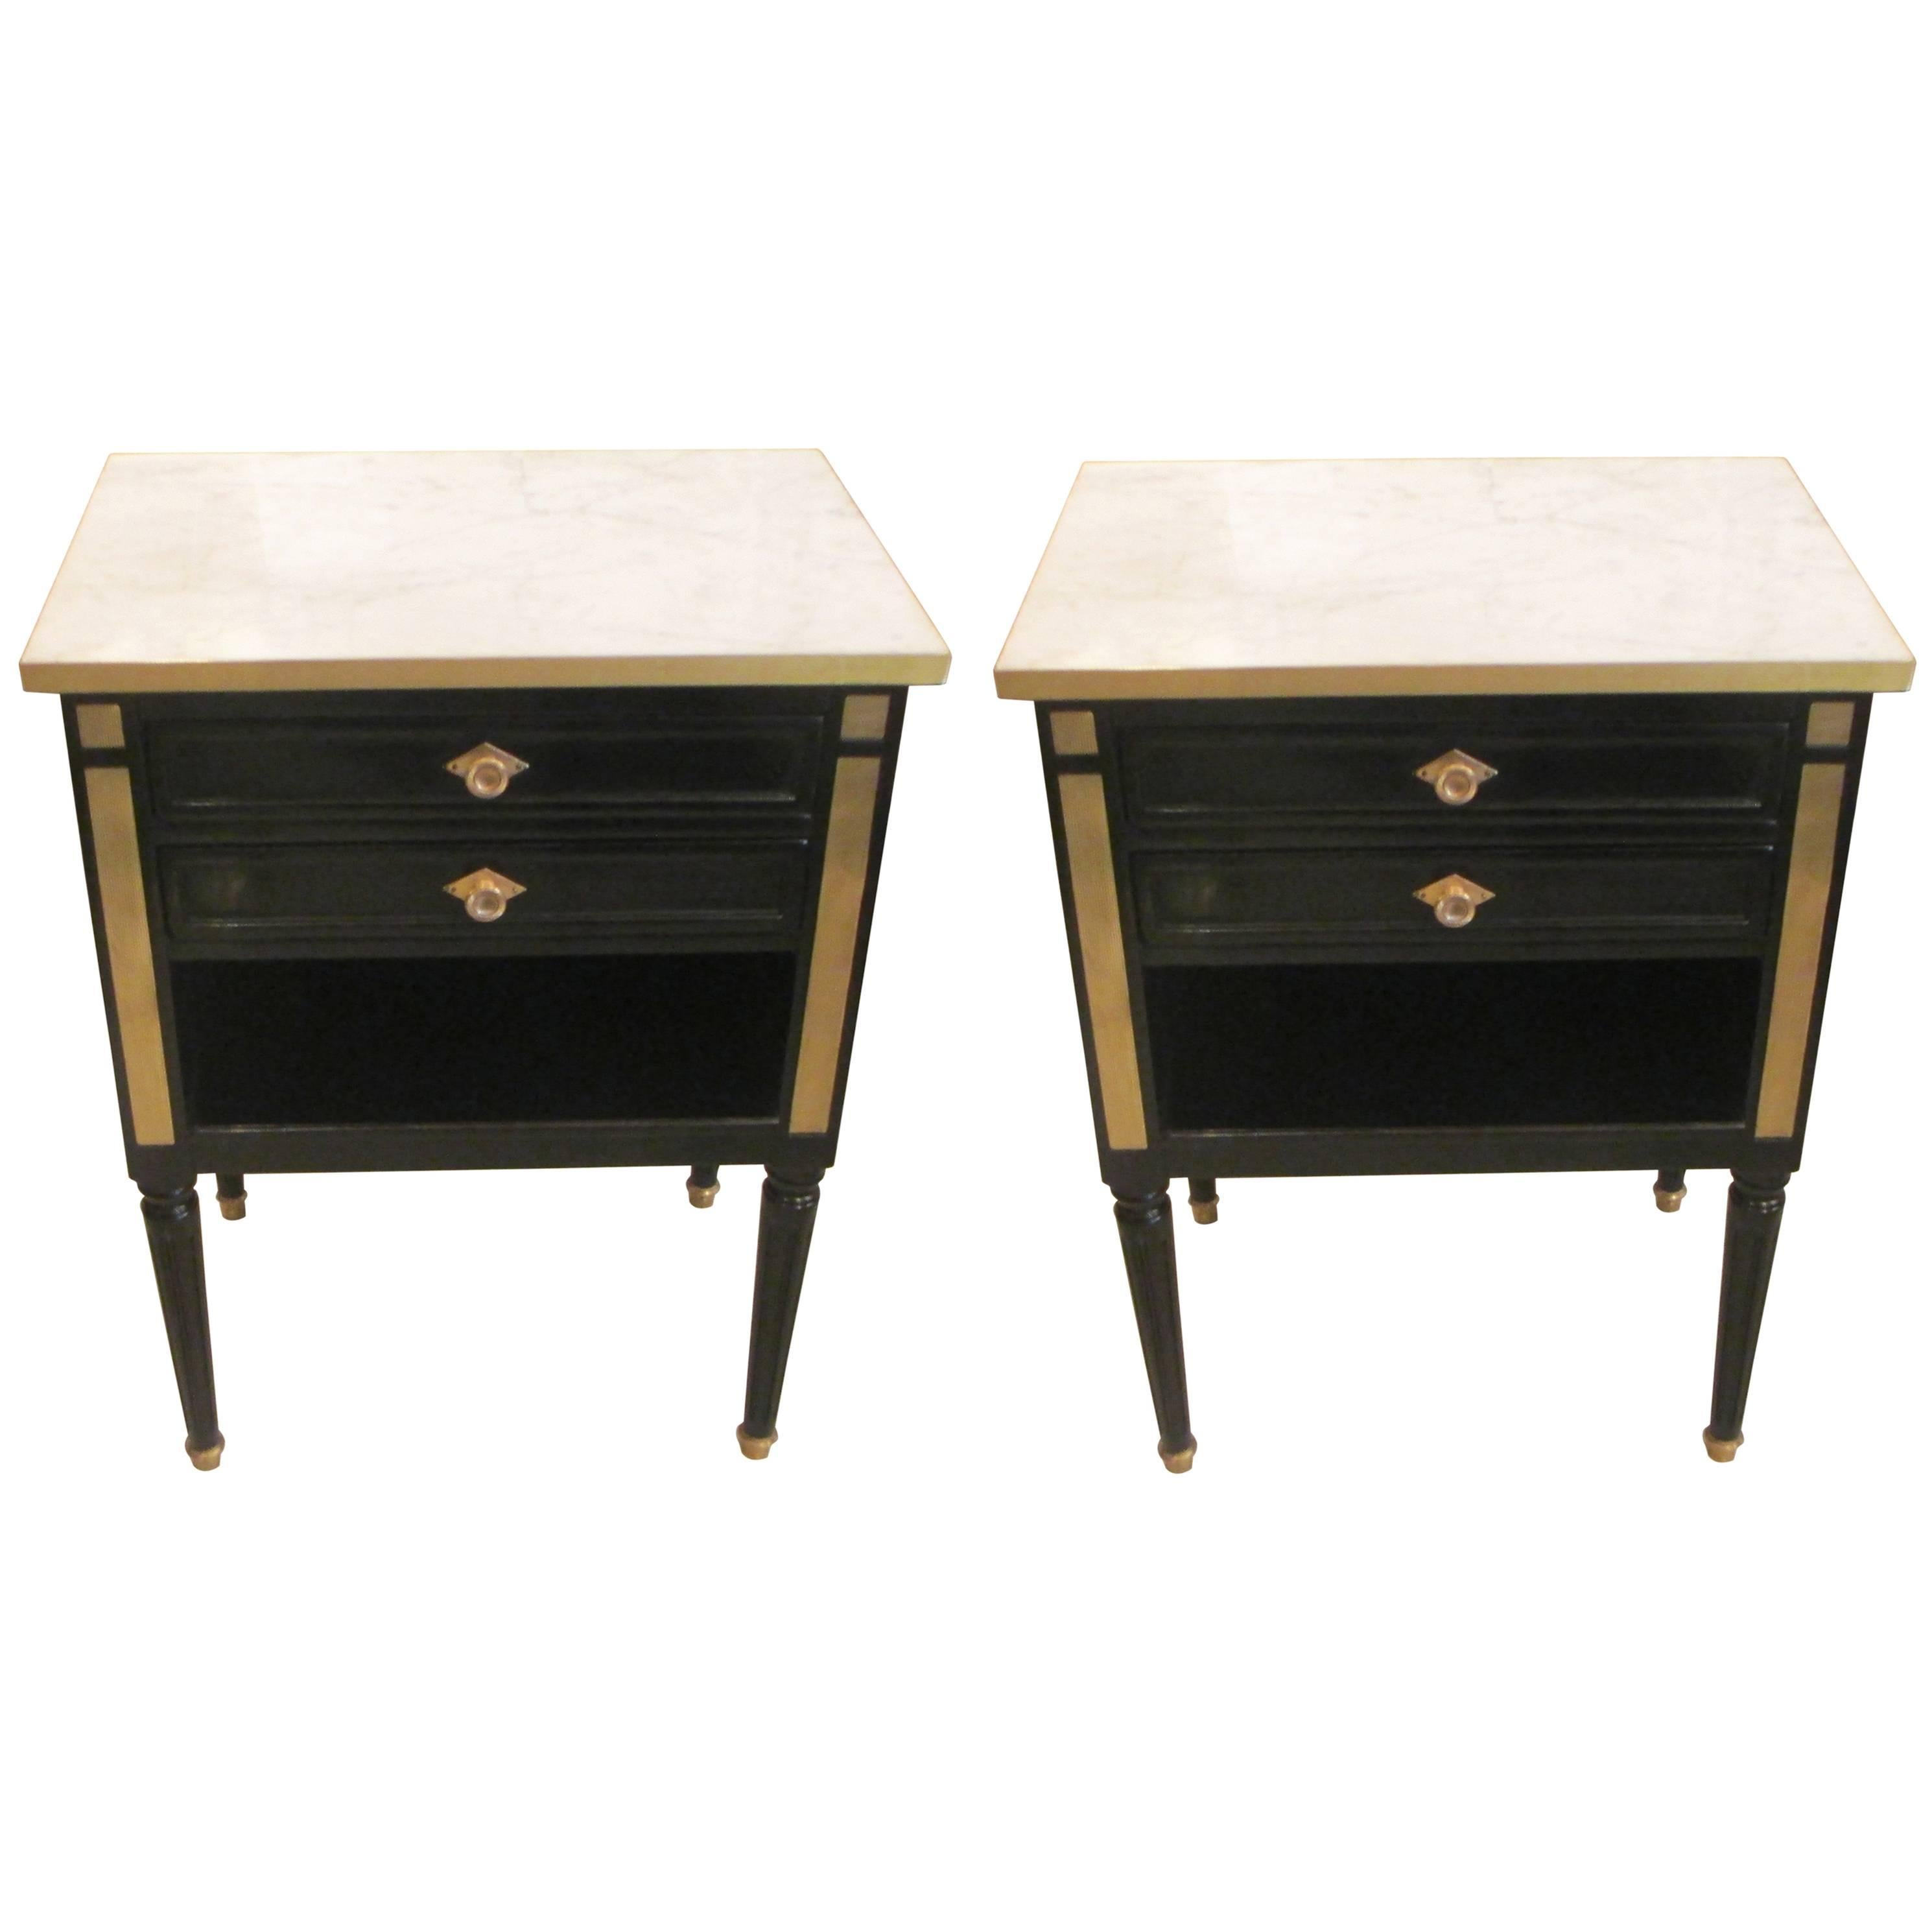 Pair of Ebonized Directoire-Style, Brass-Mounted Nightstands With Marble Top